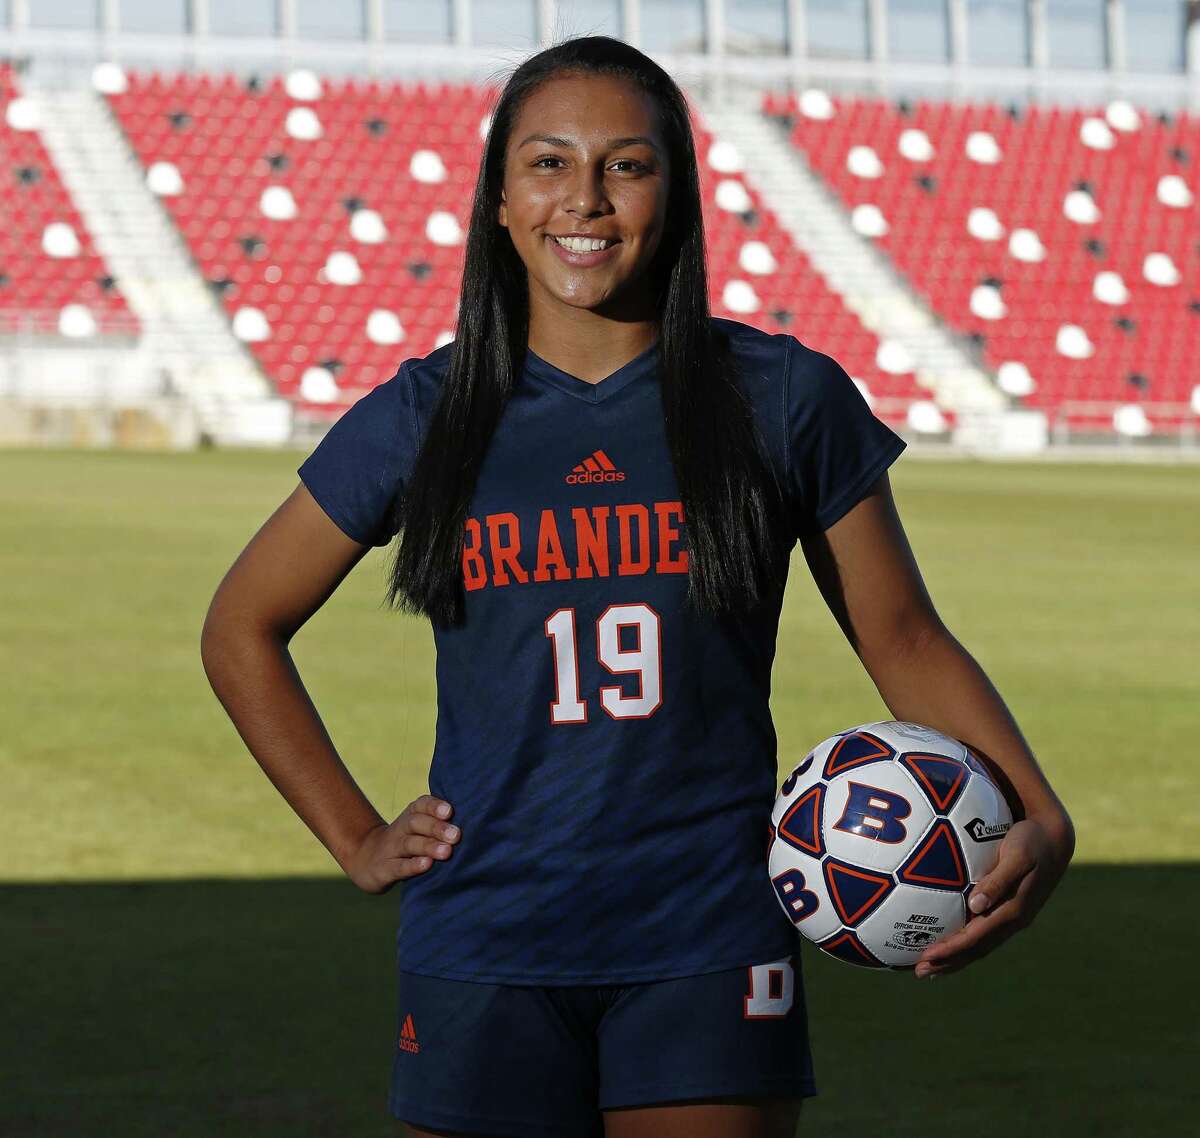 Brandeis’ Marissa Arias, posing at Toyota Field, is a member of the 2017 Express-News All-Area Girls Soccer Super Team.